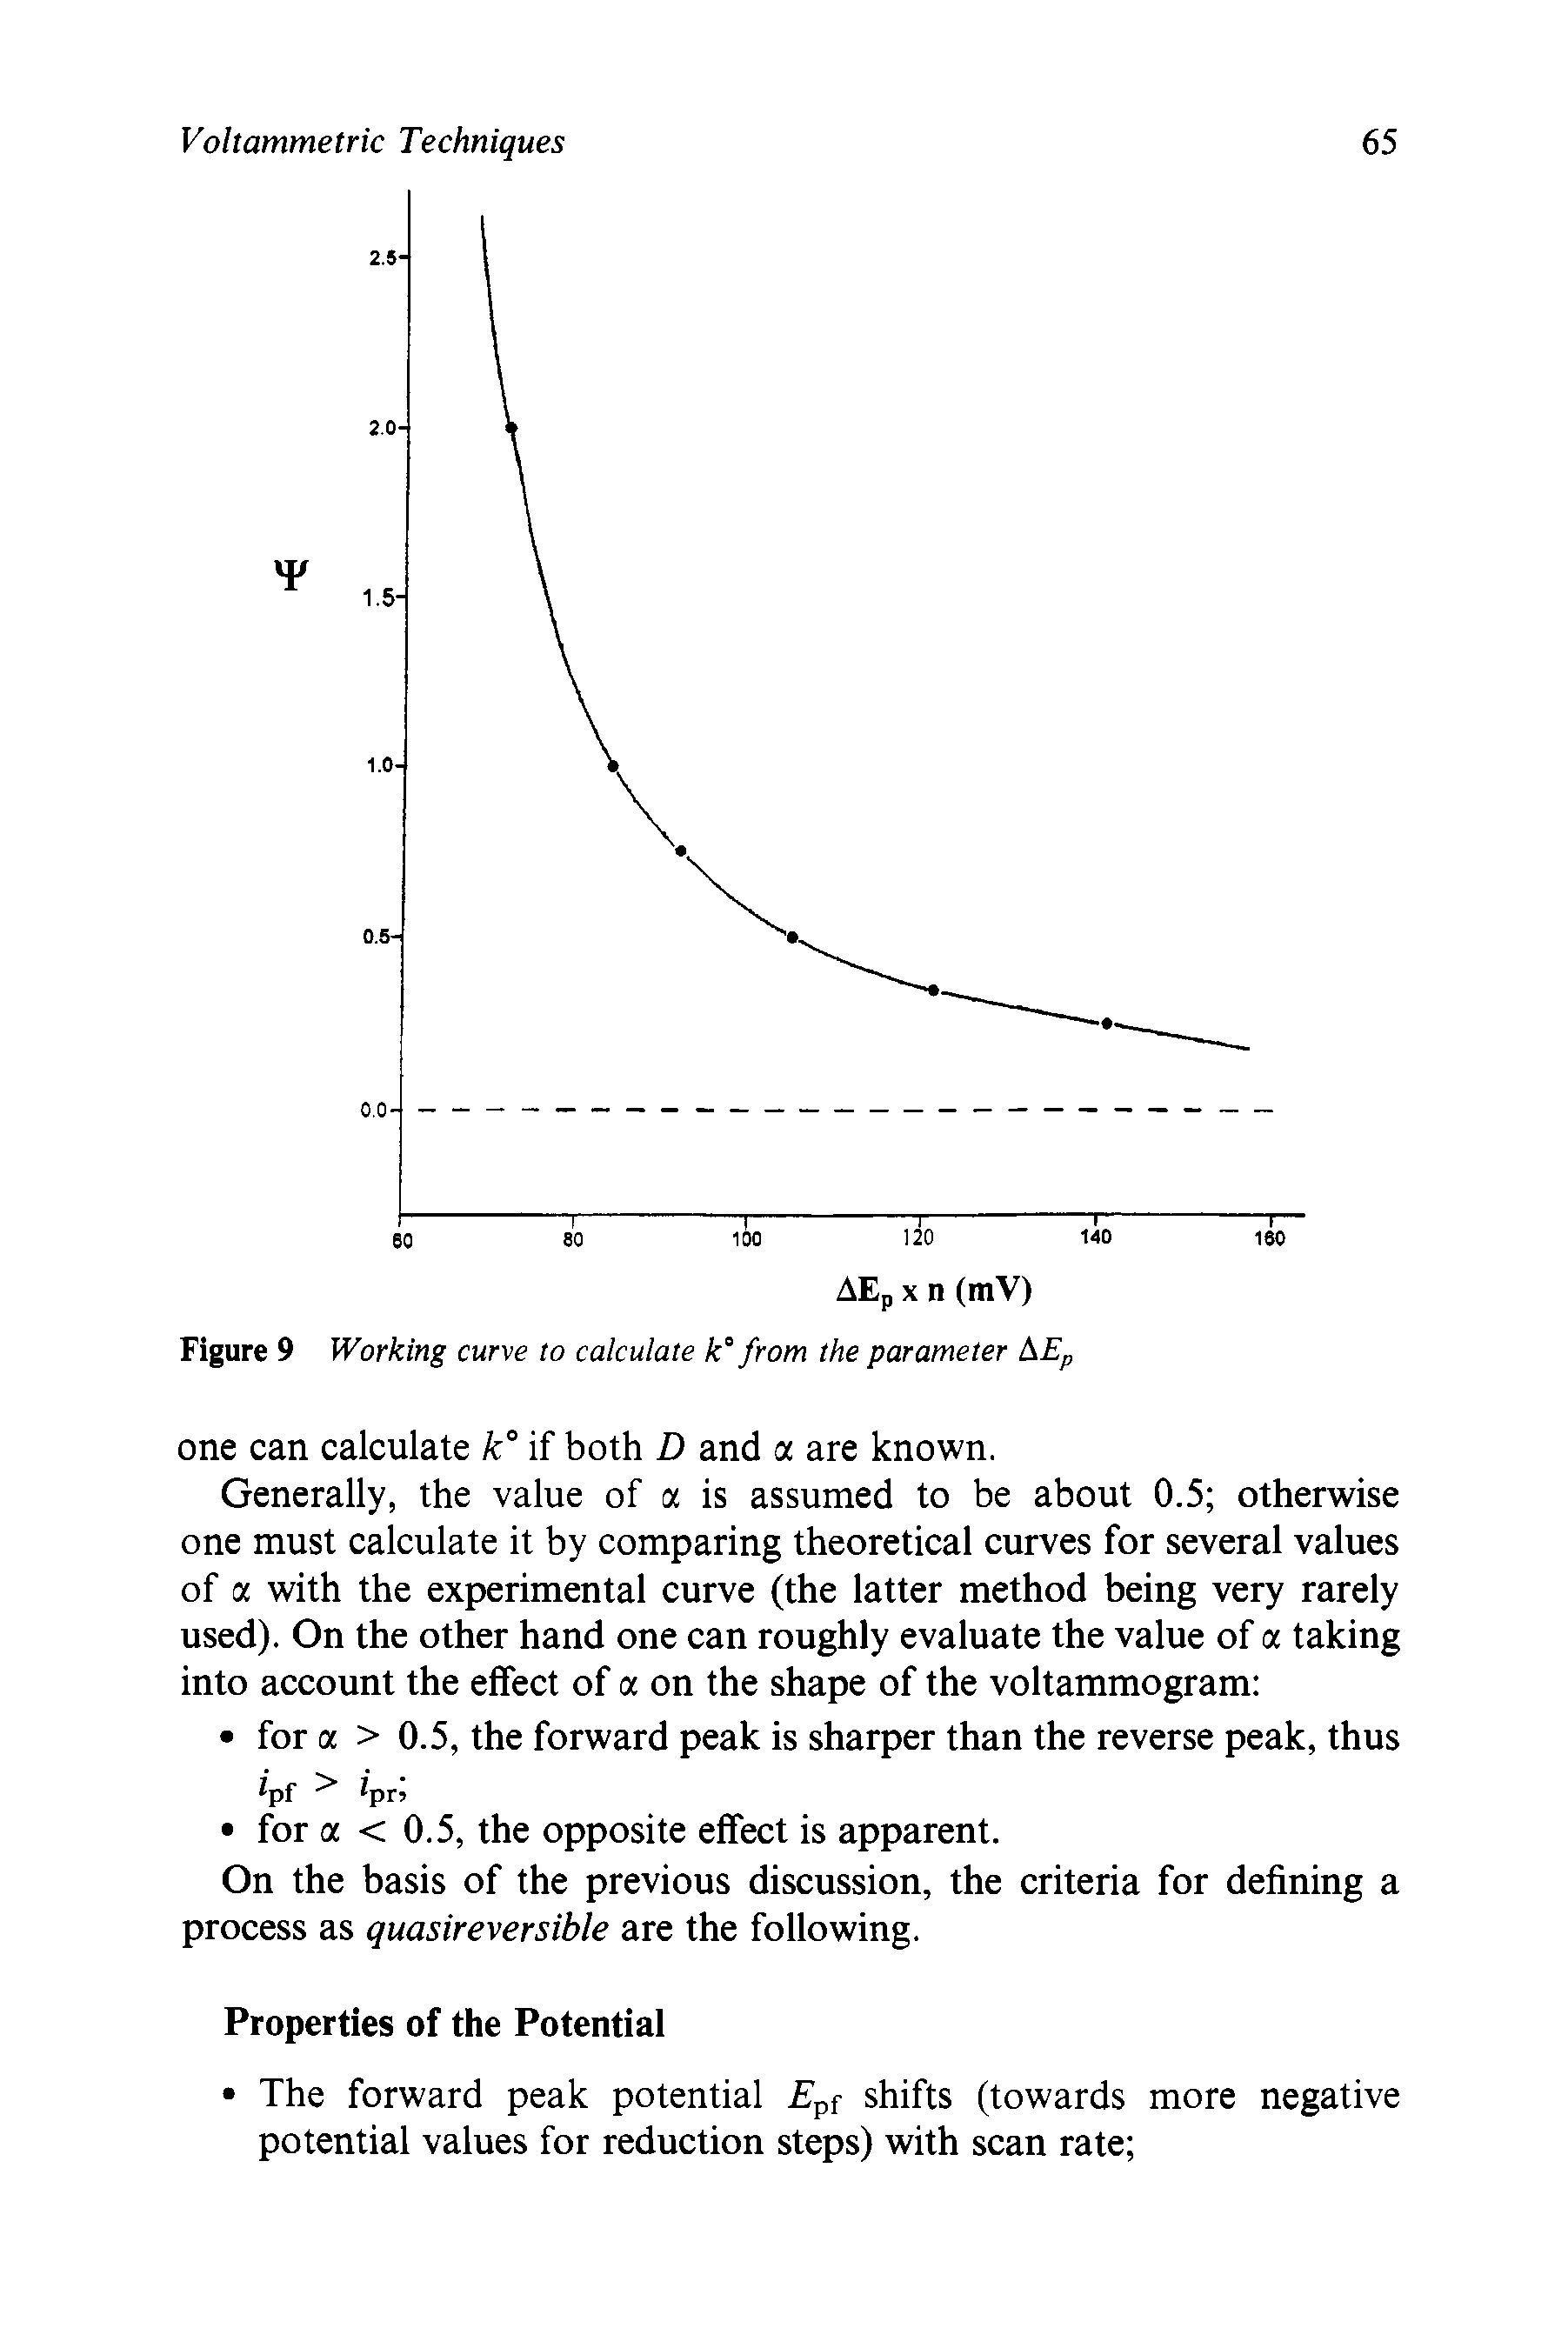 Figure 9 Working curve to calculate k° from the parameter AEp...